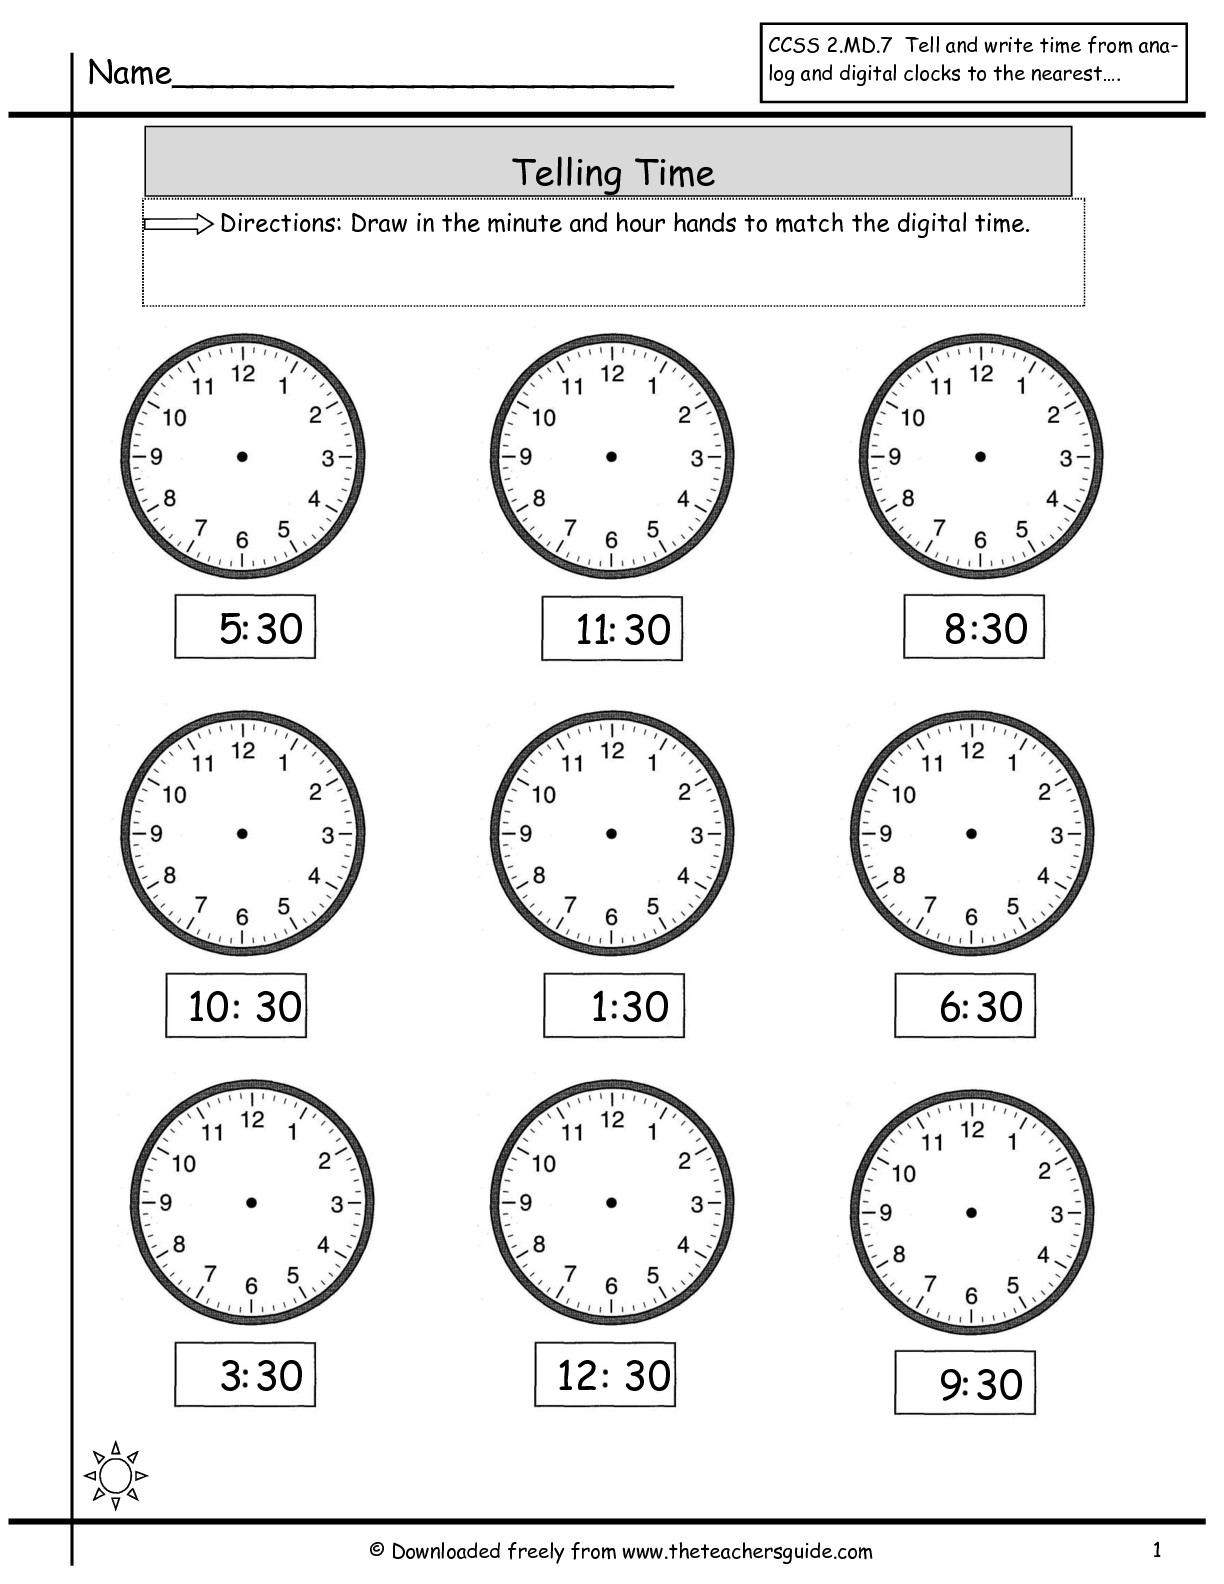 13-best-images-of-o-clock-worksheets-half-past-and-half-past-telling